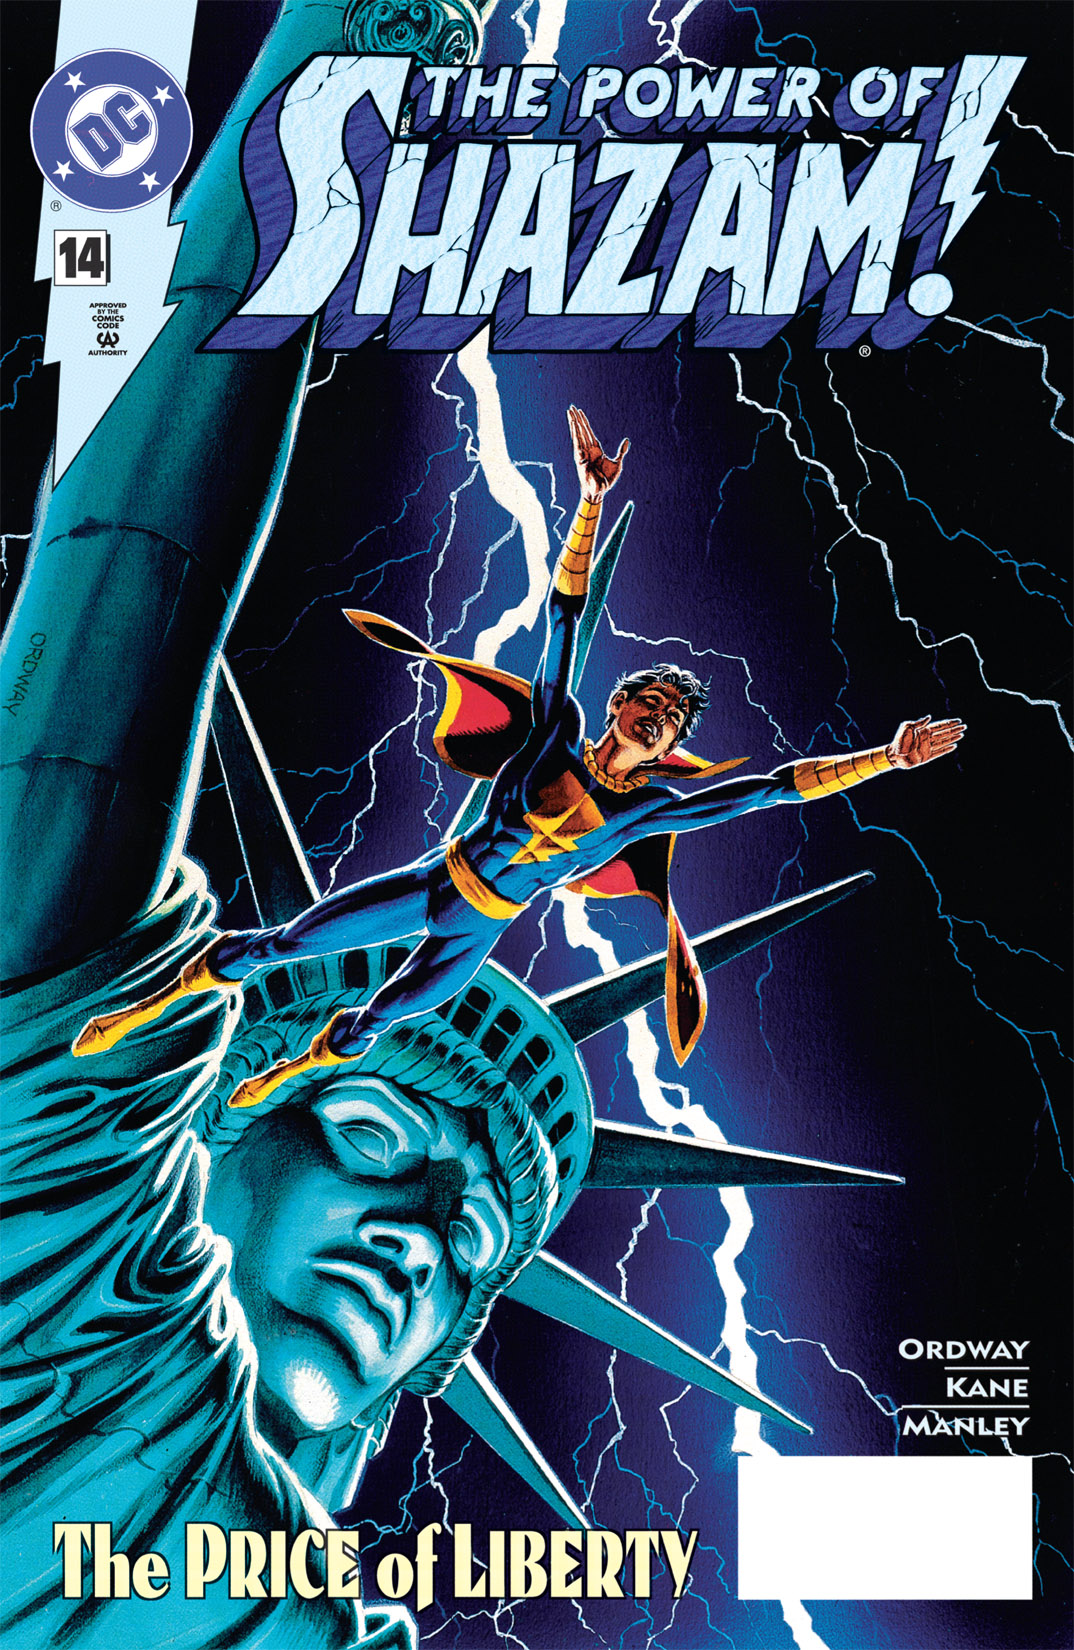 Read online The Power of SHAZAM! comic -  Issue #14 - 1